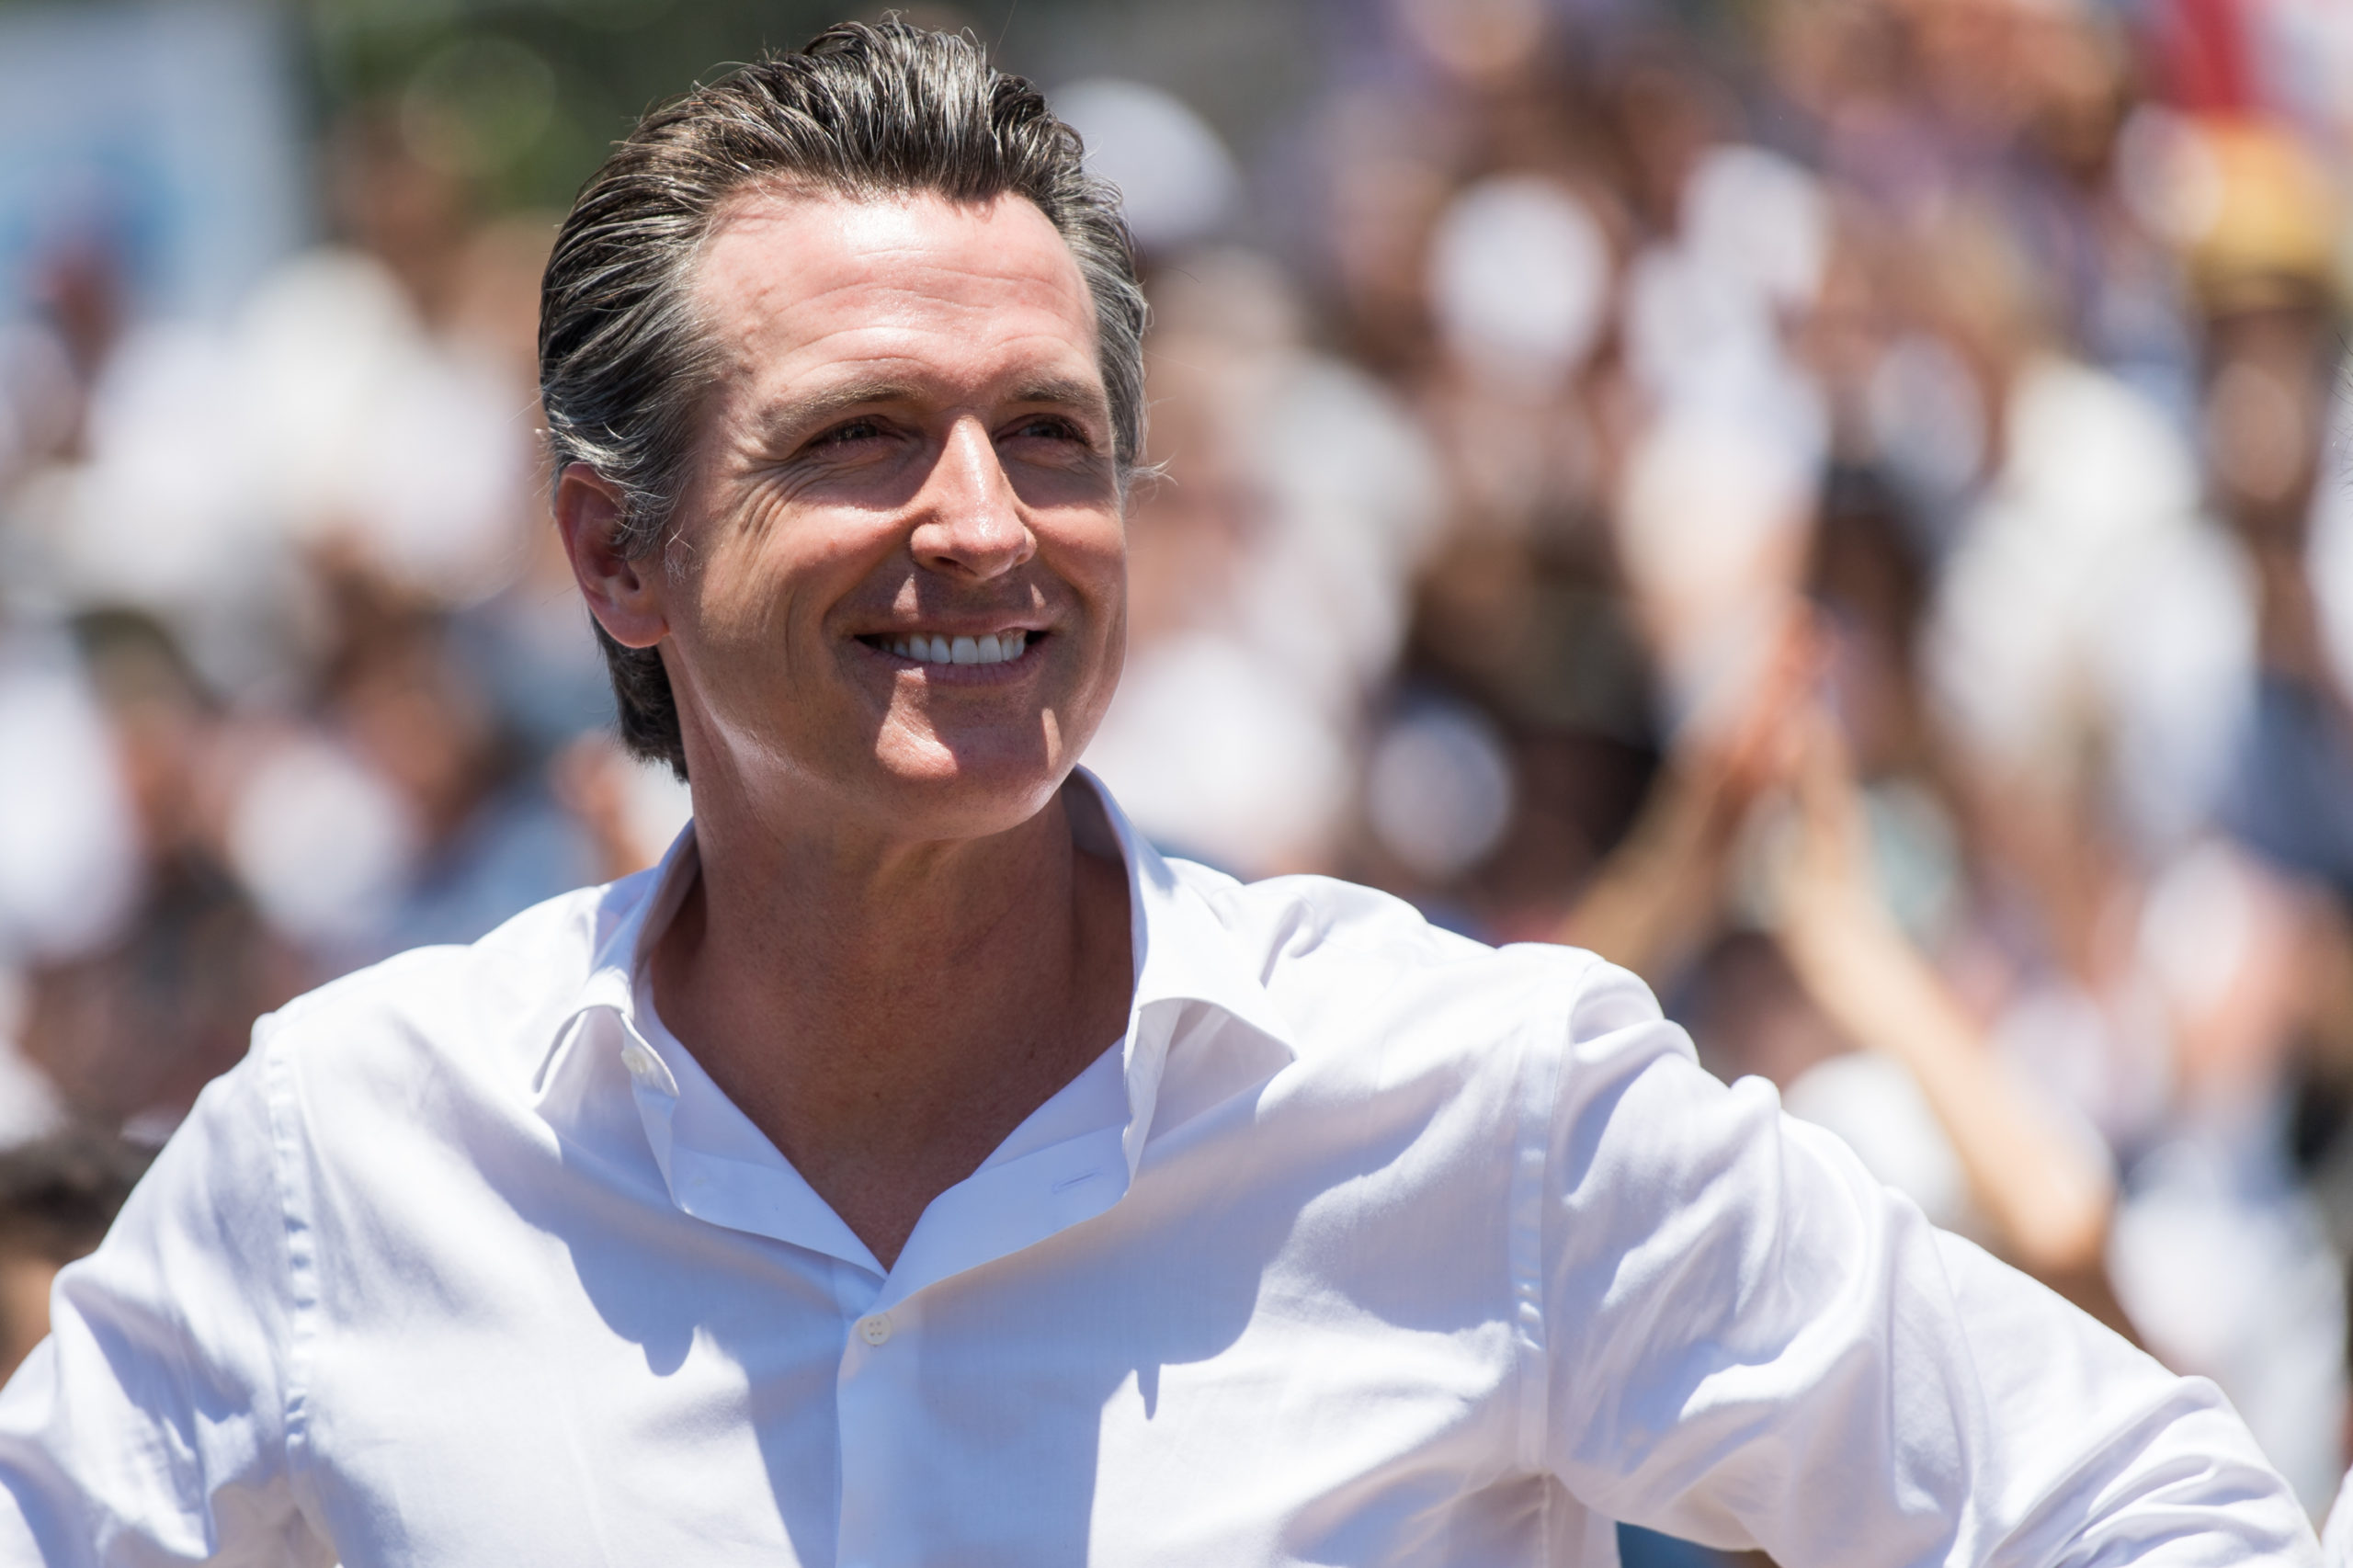 Gavin Newsom attends 'Families Belong Together - Freedom for Immigrants March Los Angeles' at Los Angeles City Hall on June 30, 2018 in Los Angeles, California. (Photo by Emma McIntyre/Getty Images for Families Belong Together LA)